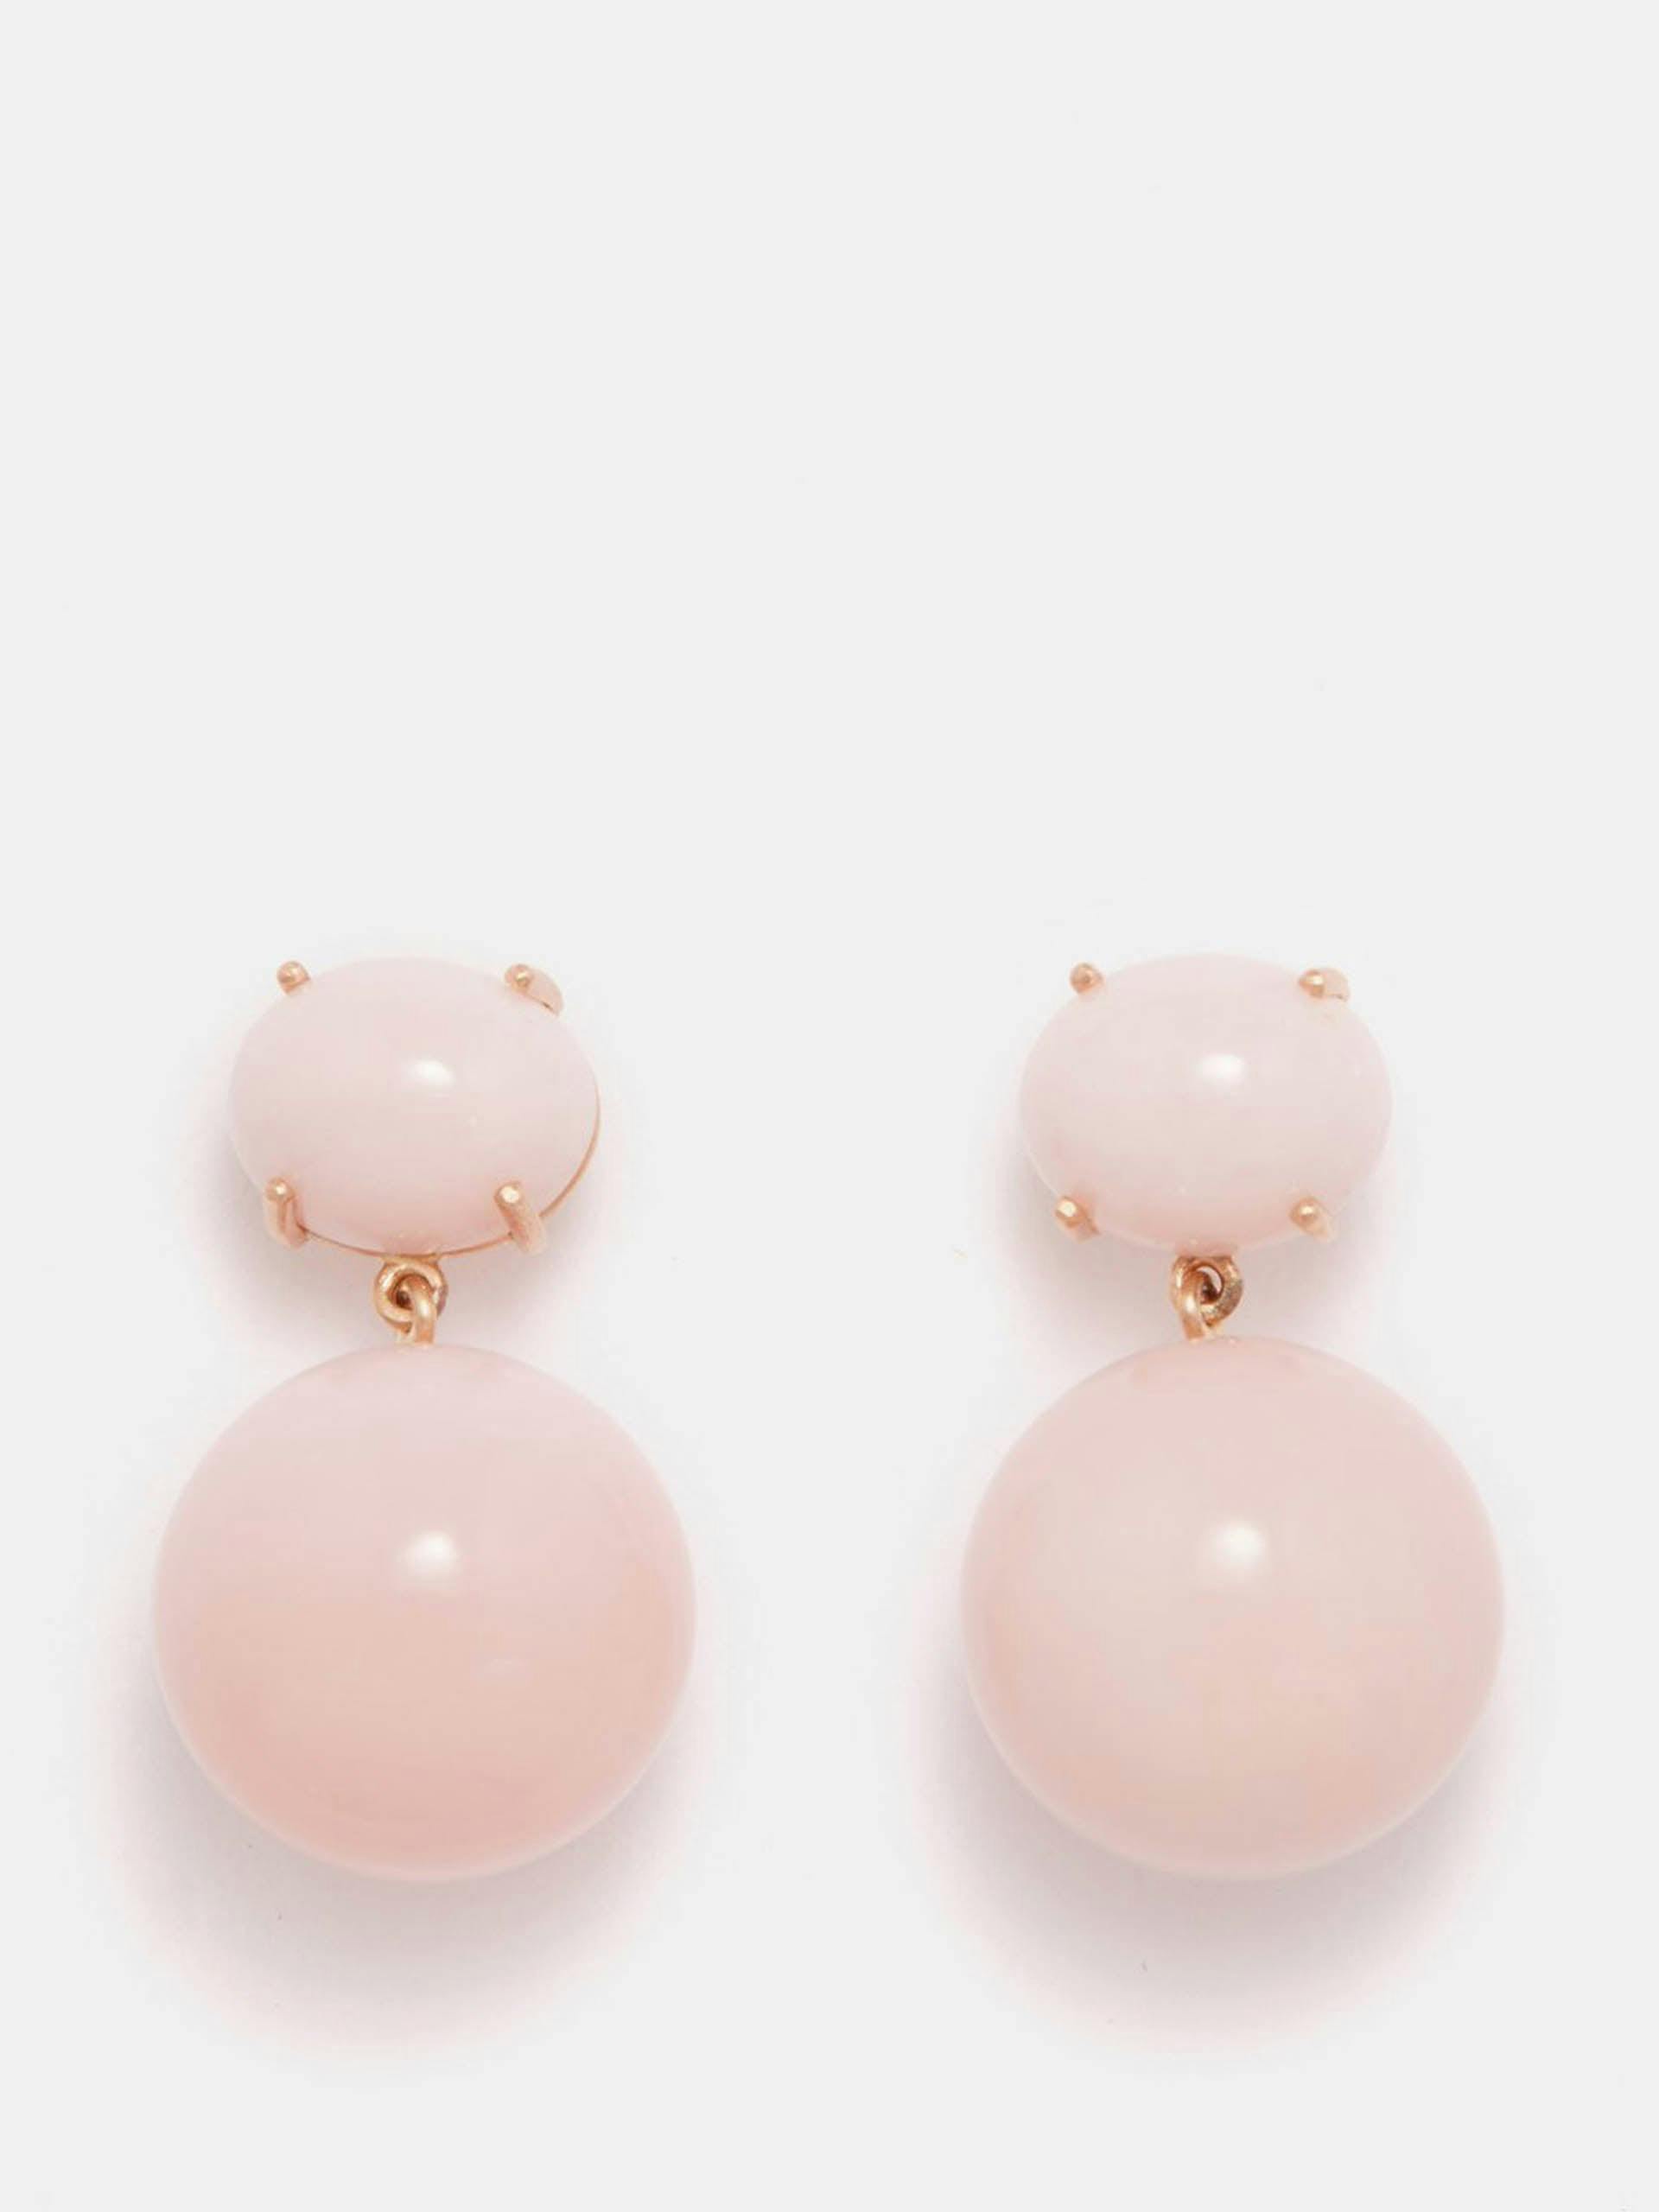 Opal and 18kt rose-gold earrings